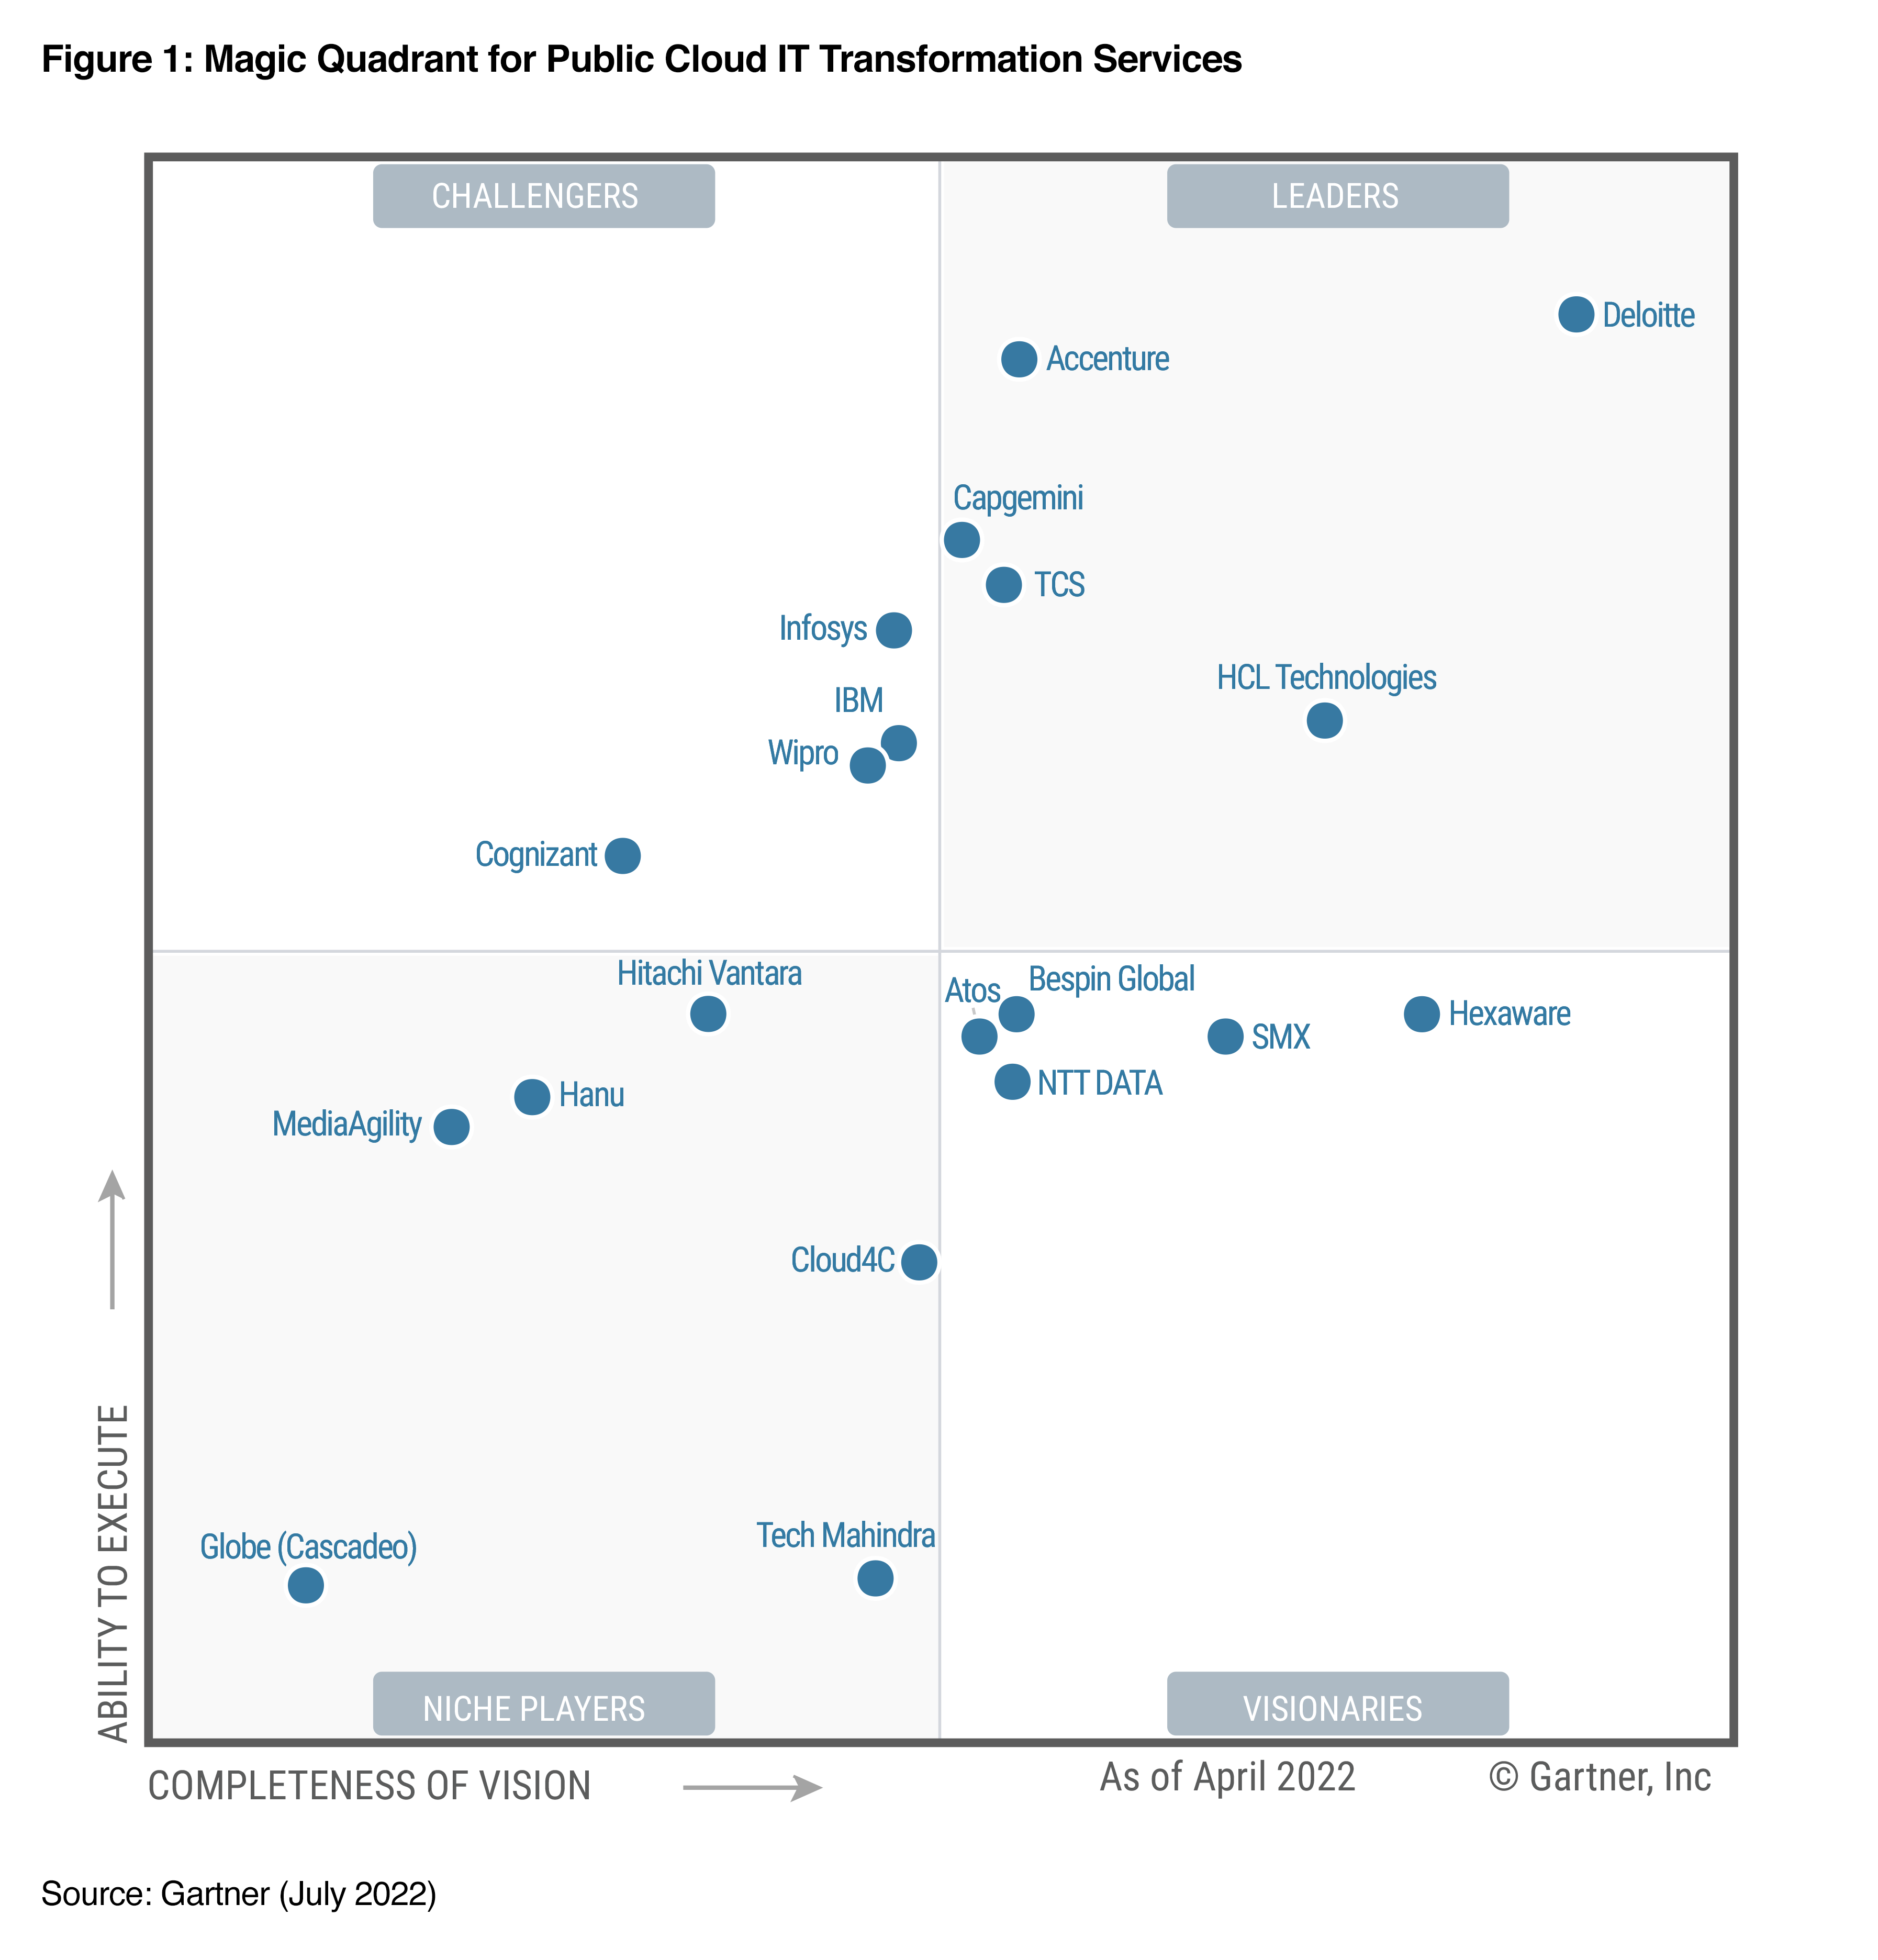 Thank you for requesting “Gartner Magic Quadrant for Public Cloud IT Transformation Services - 2022”